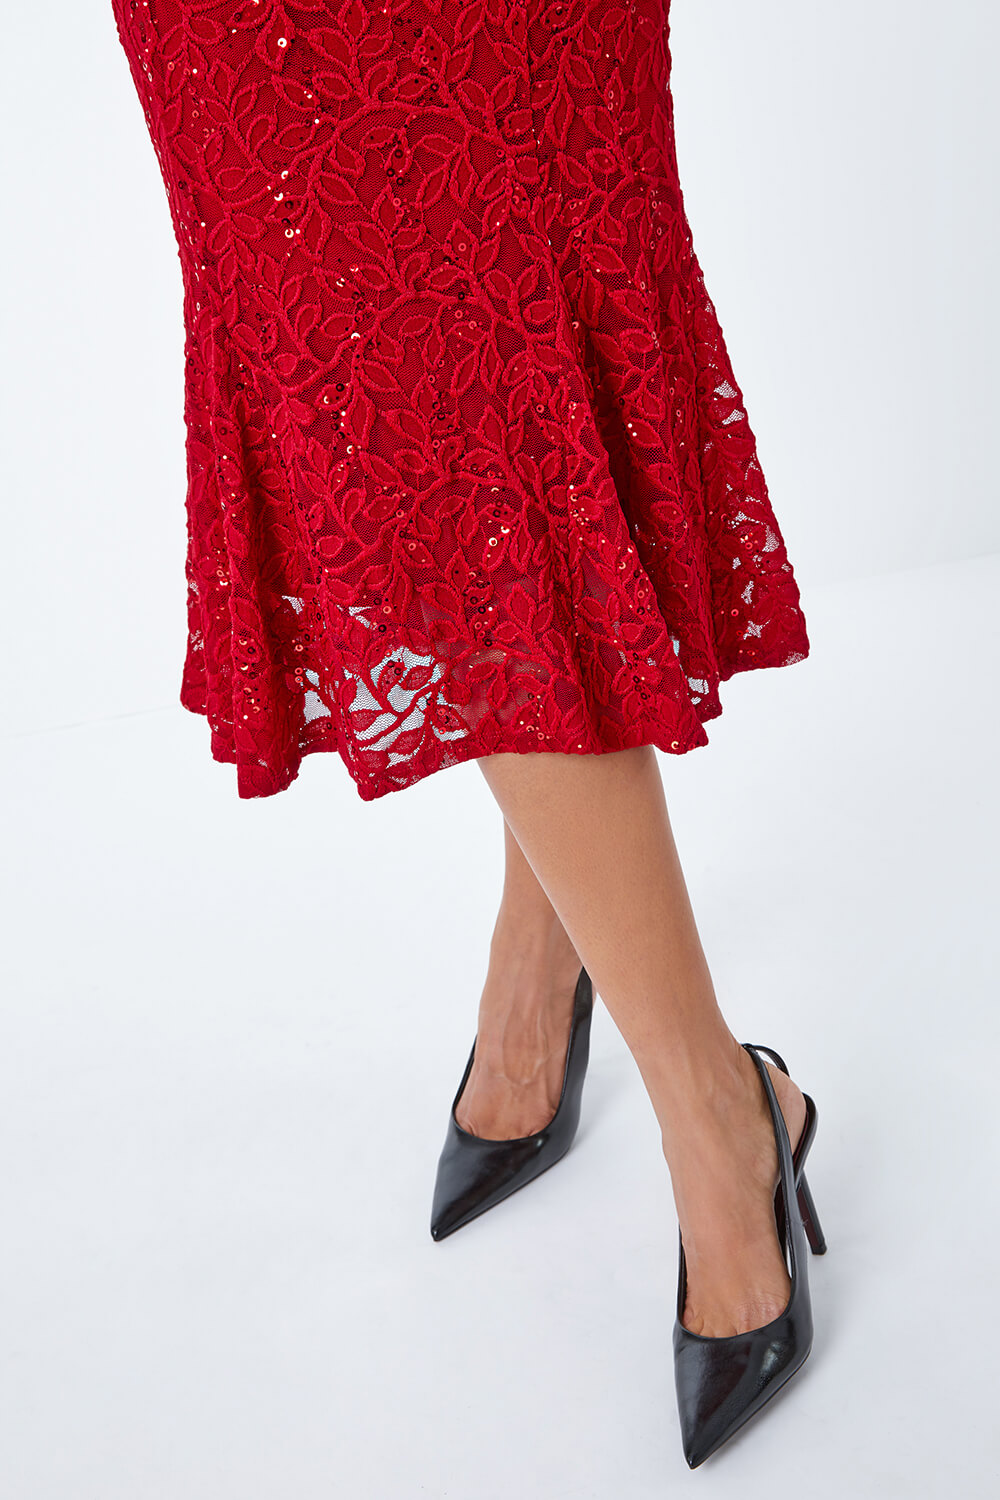 Red Leaf Lace Sequin Midi Dress, Image 5 of 5